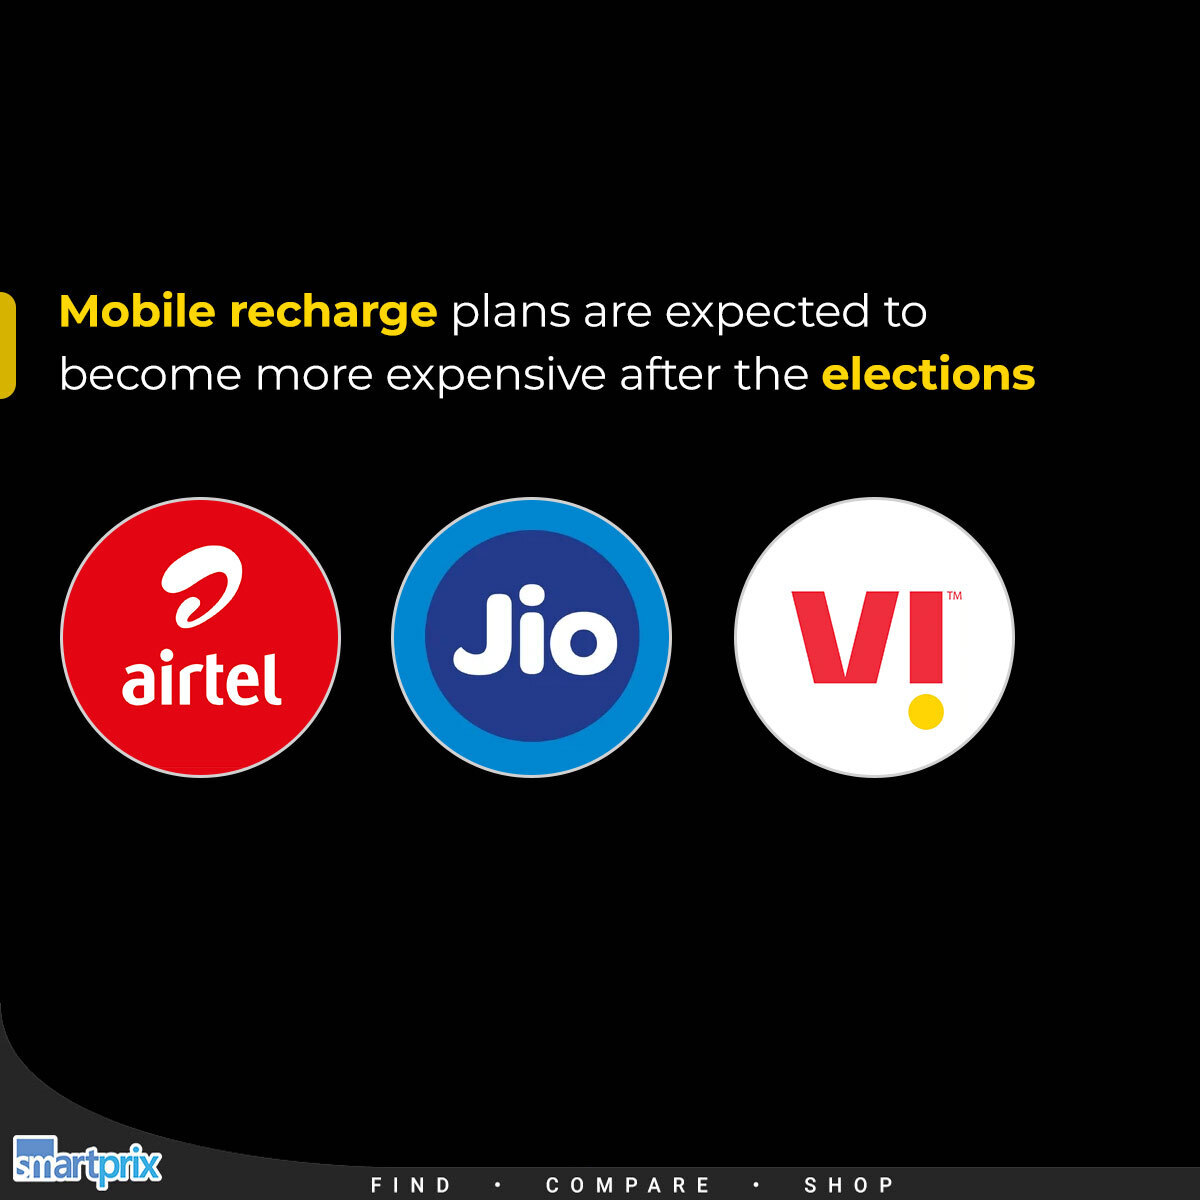 What do you think about this? Let us know in the comments! #Mobile #RechargePlans #Airtel #Jio #VodafoneIdea